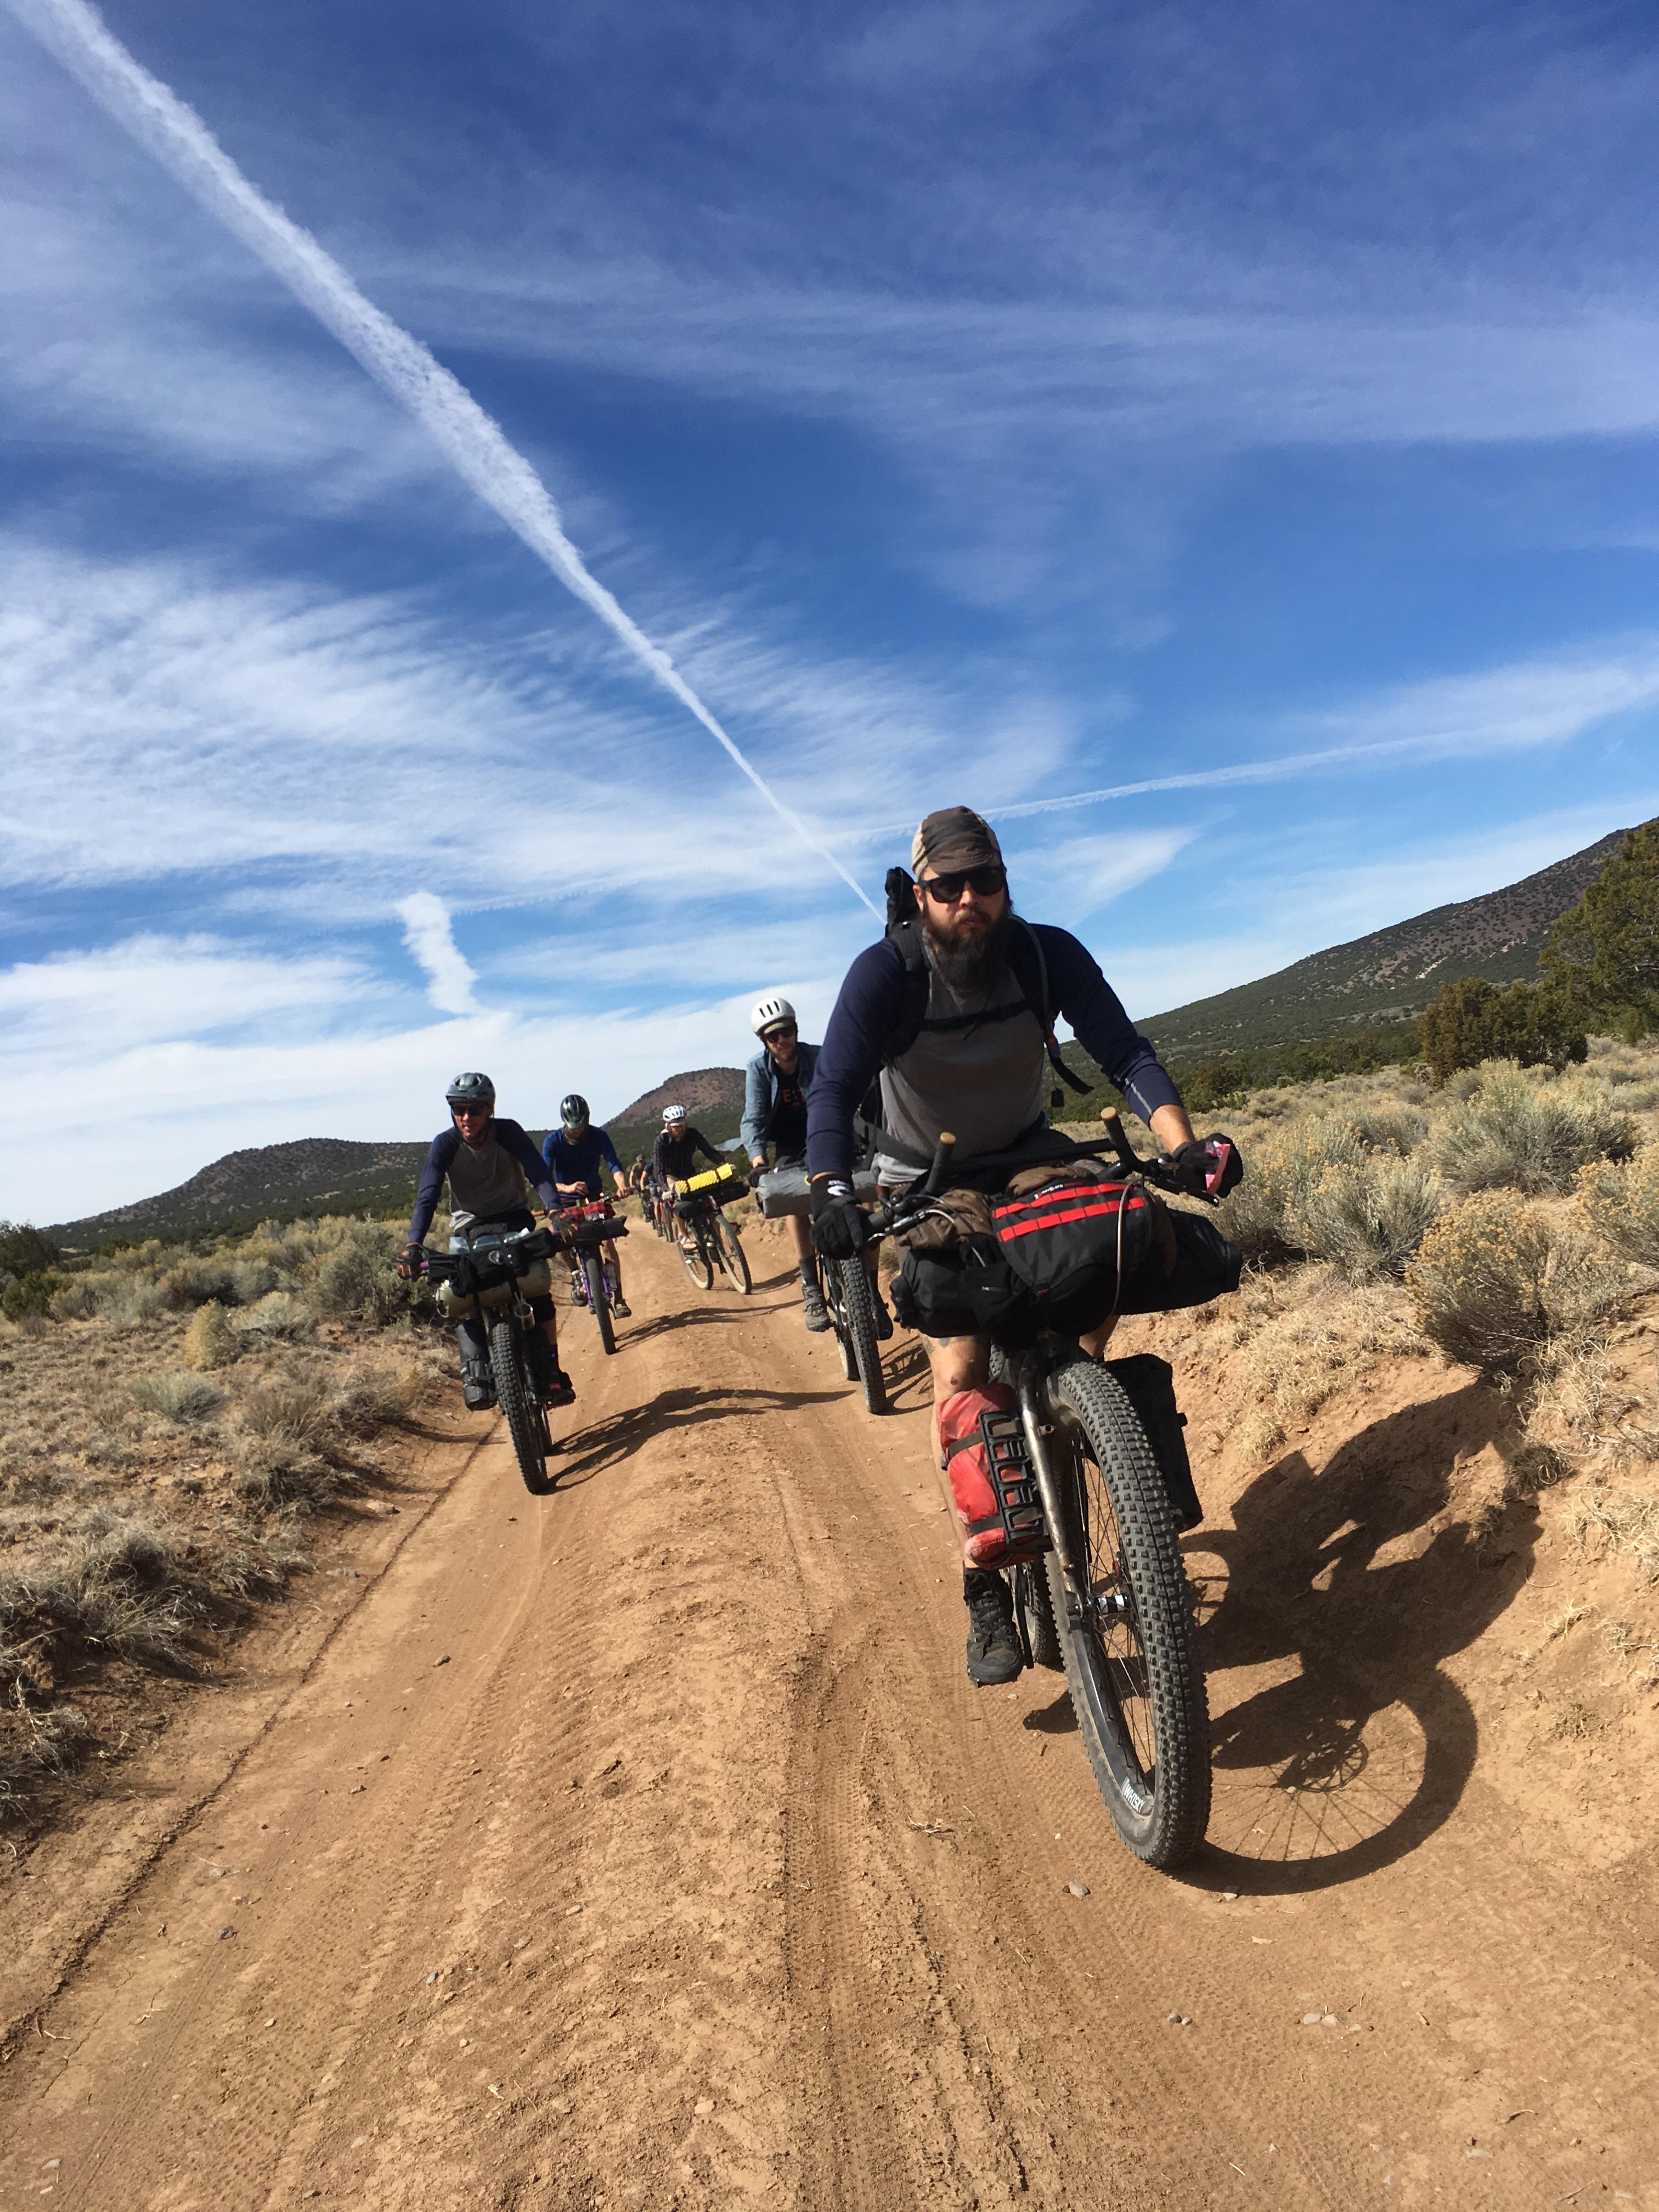 A vertical view of a horizontal photo showing group of cyclist riding down a gravel  desert road